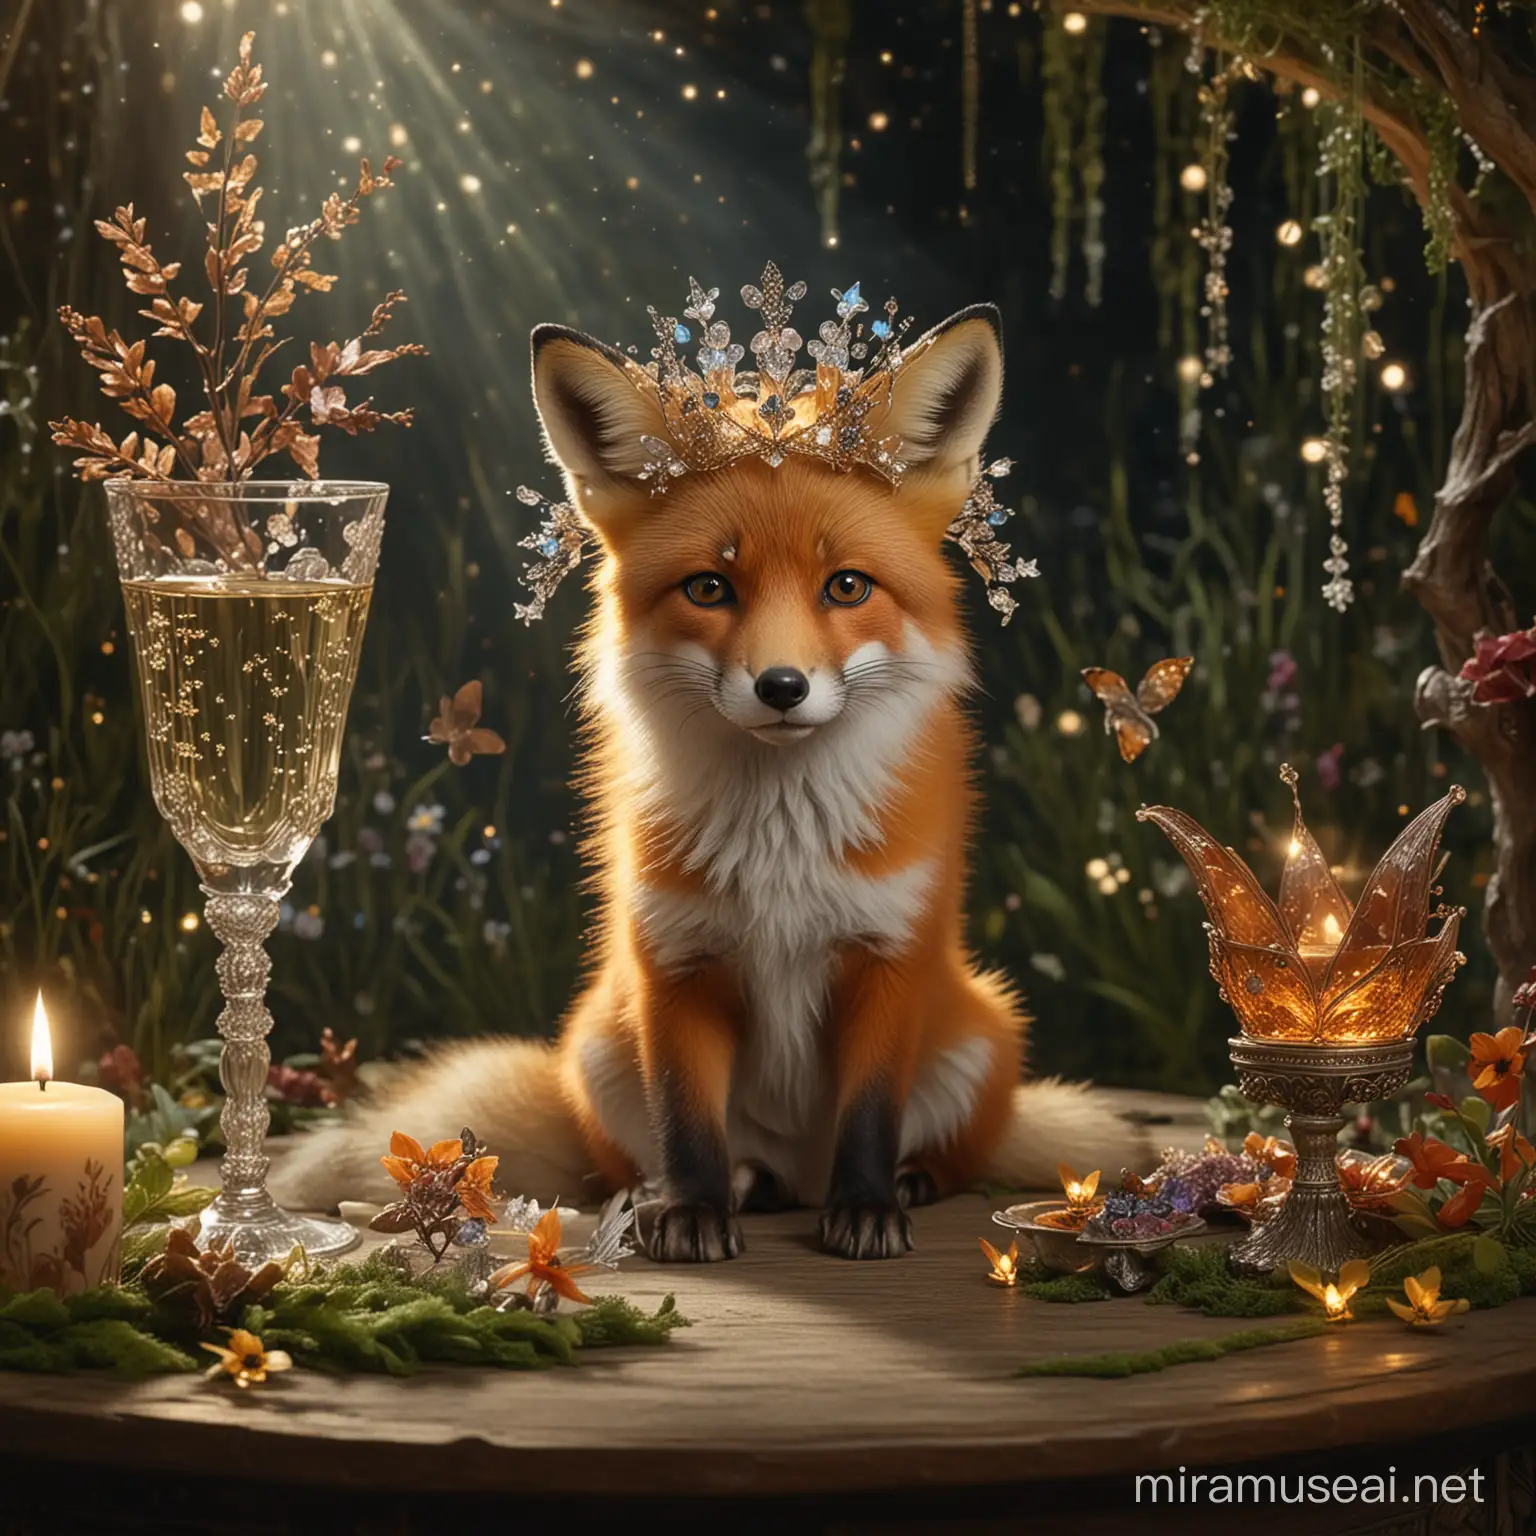 A fox in an exquisite headdress is sitting in a clearing, a table is next to the fox, a sparkling and glittering crystal tea glass is on the table, glowing sparkles and butterflies are fluttering around the fox